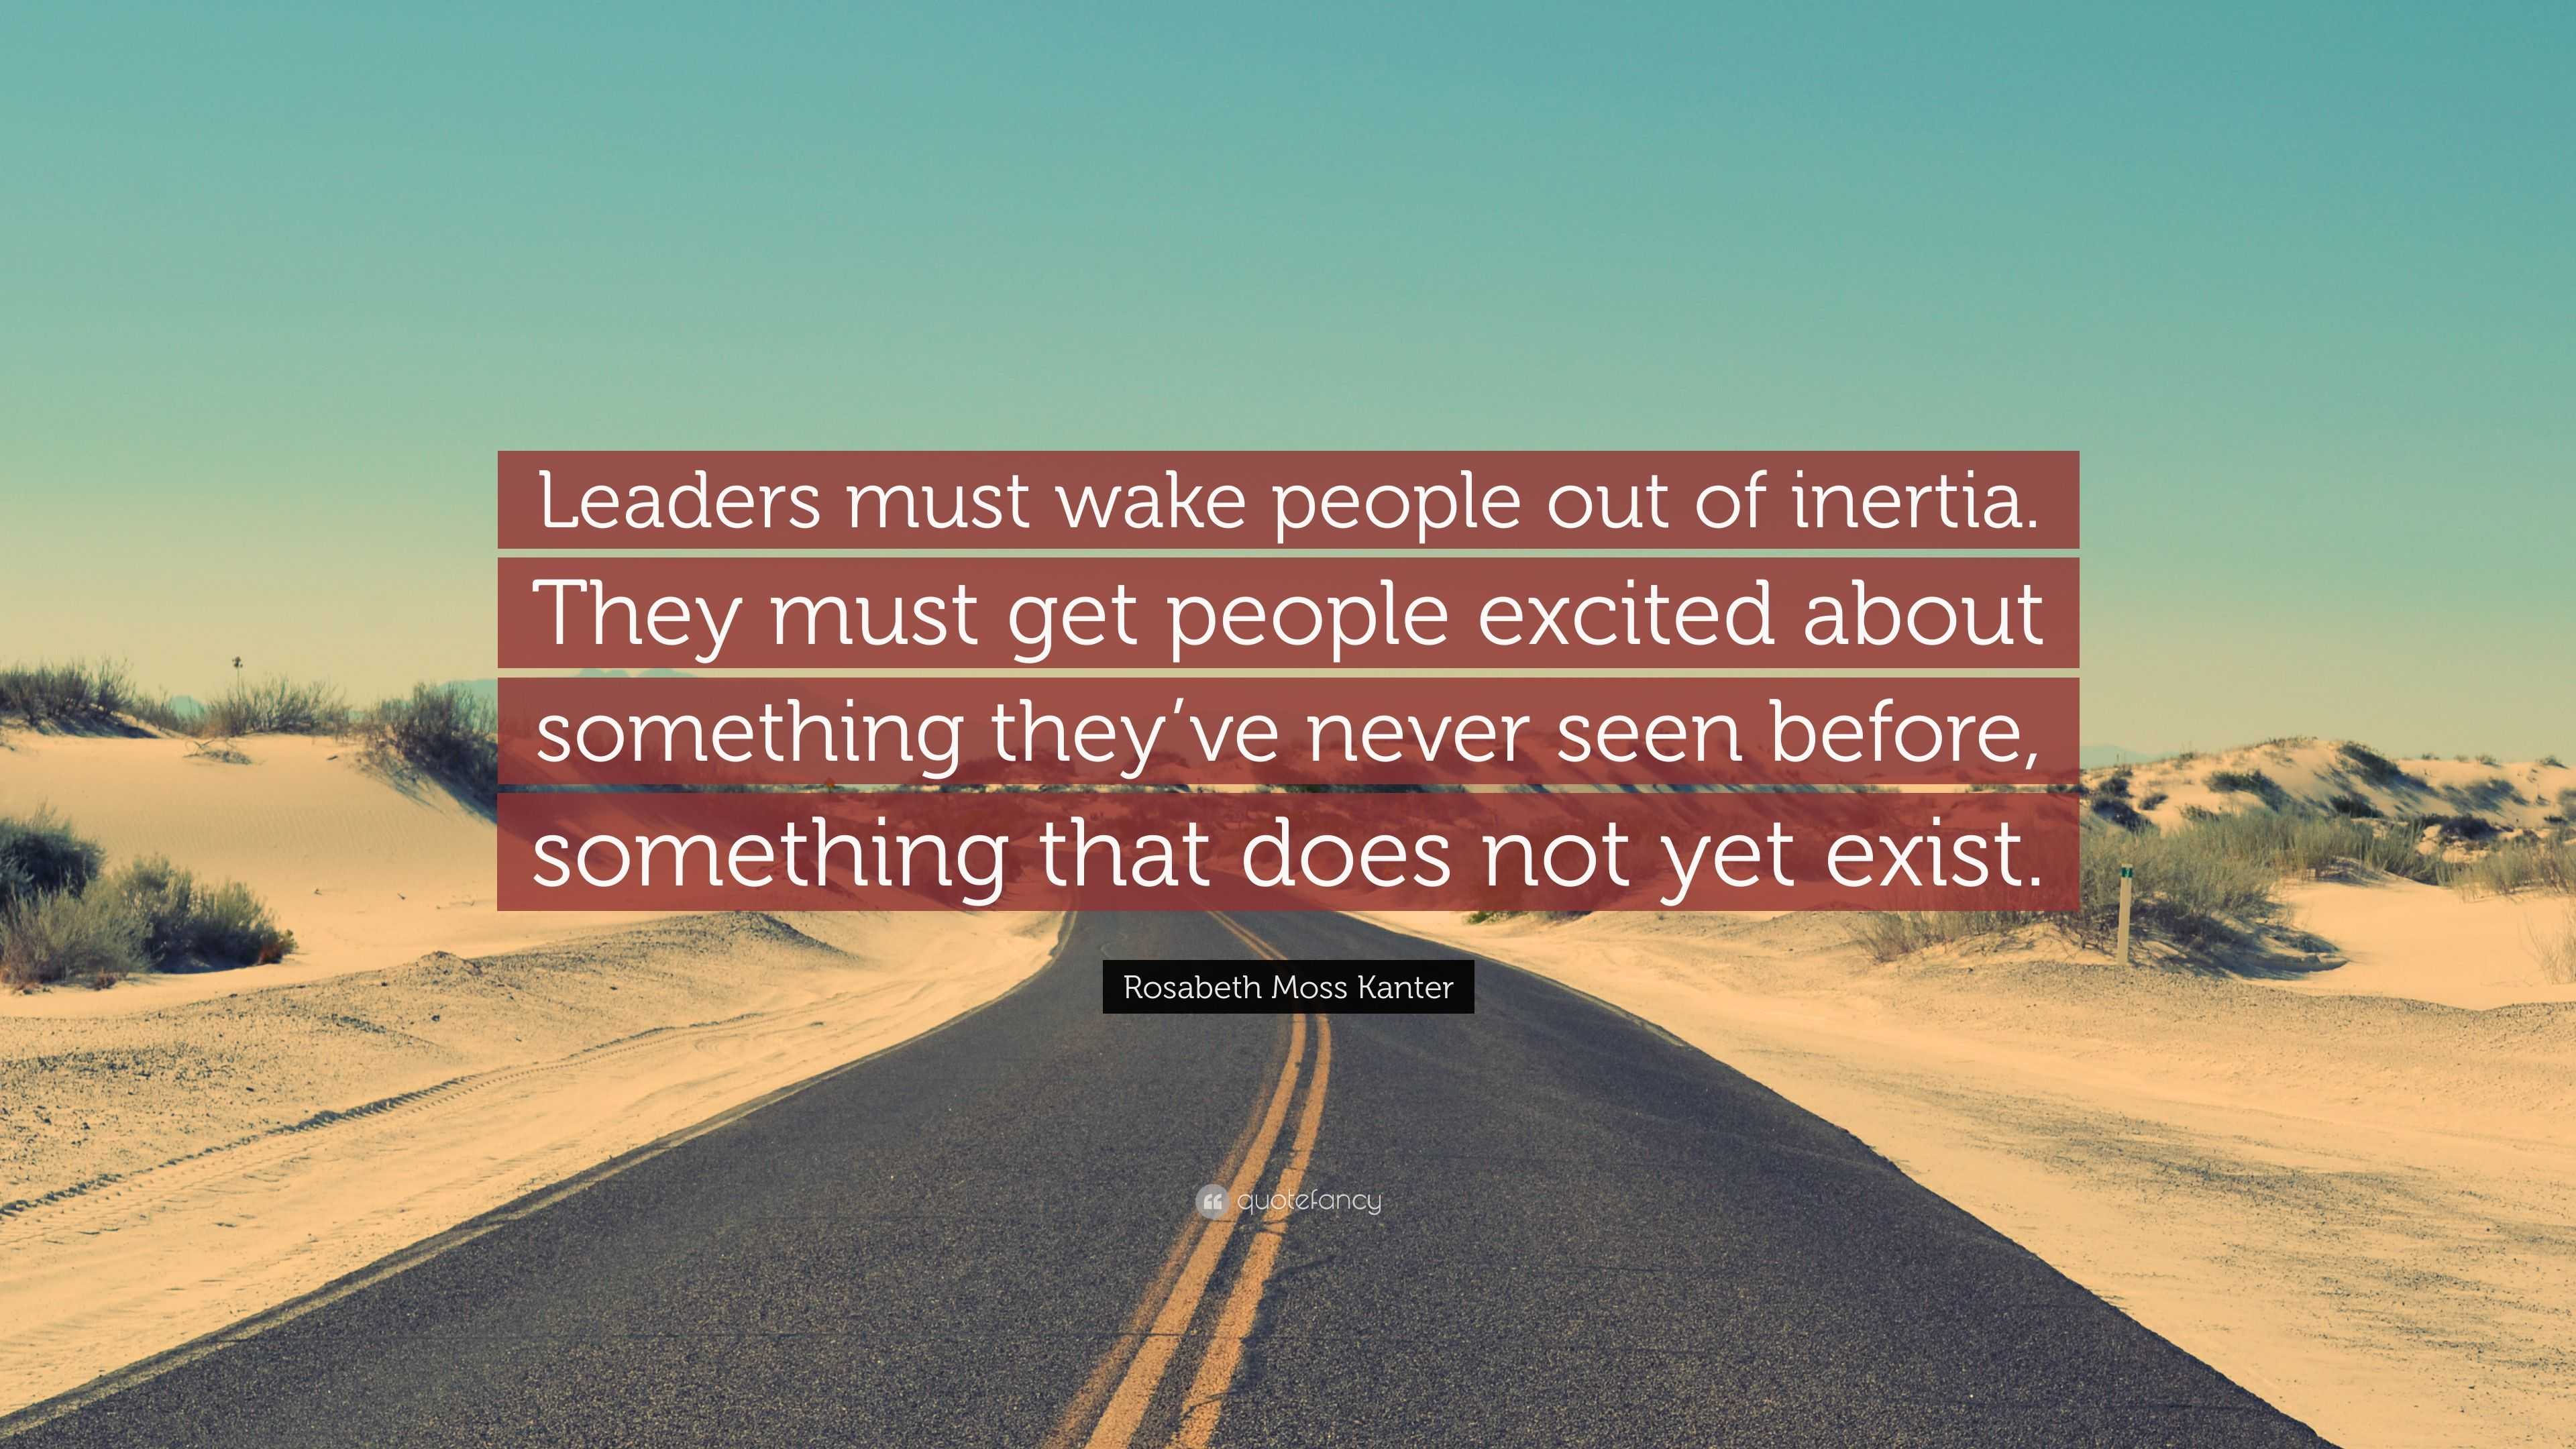 Rosabeth Moss Kanter Quote “leaders Must Wake People Out Of Inertia They Must Get People